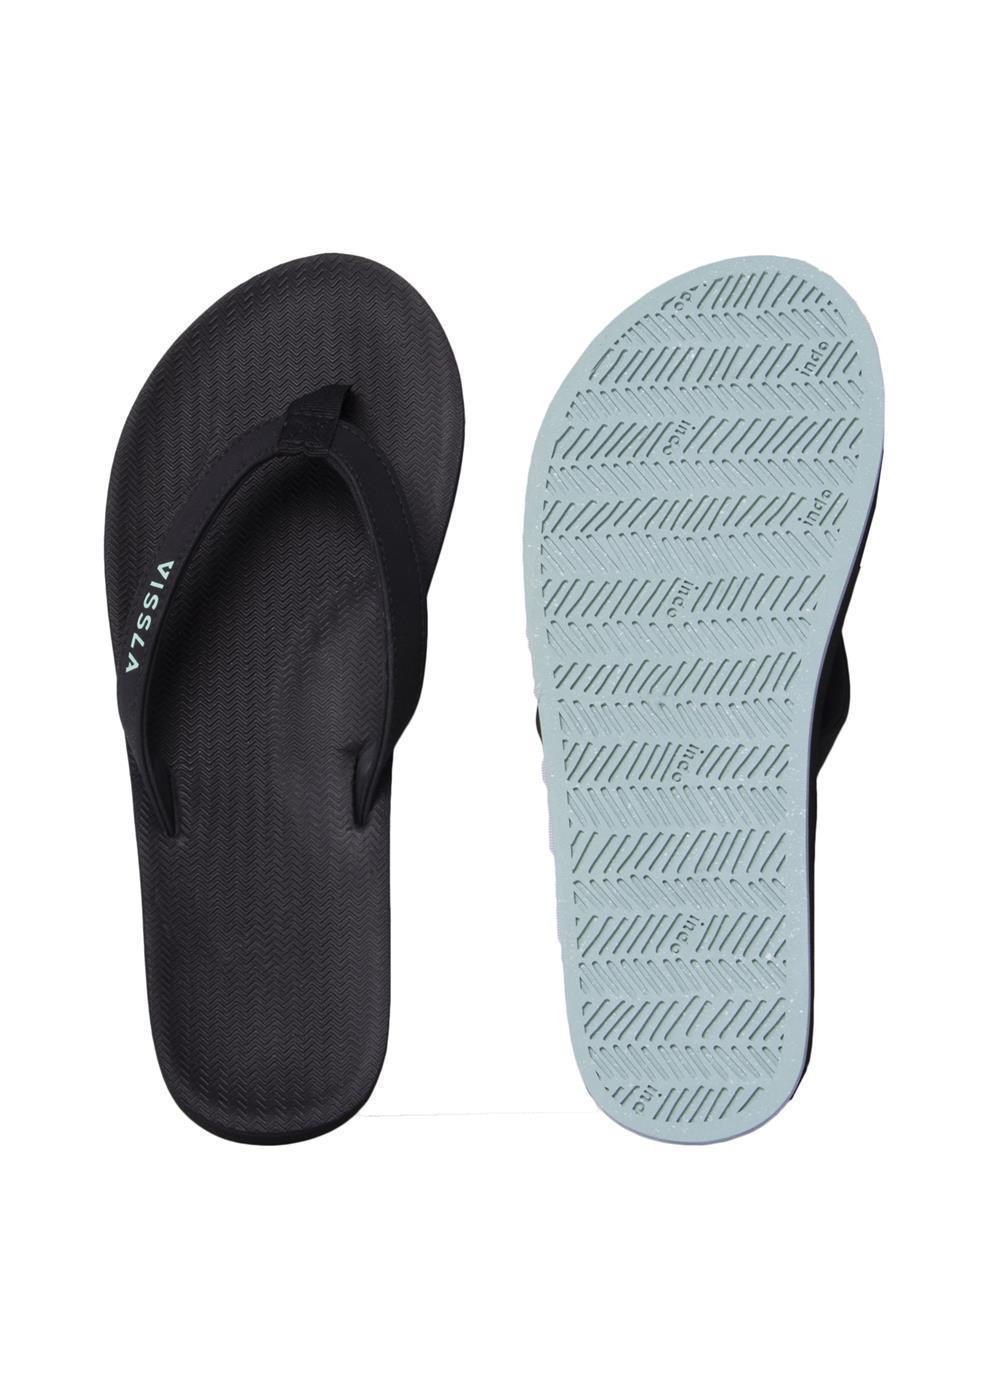 Black Vissla Sandals with a Jade Sole - Top View